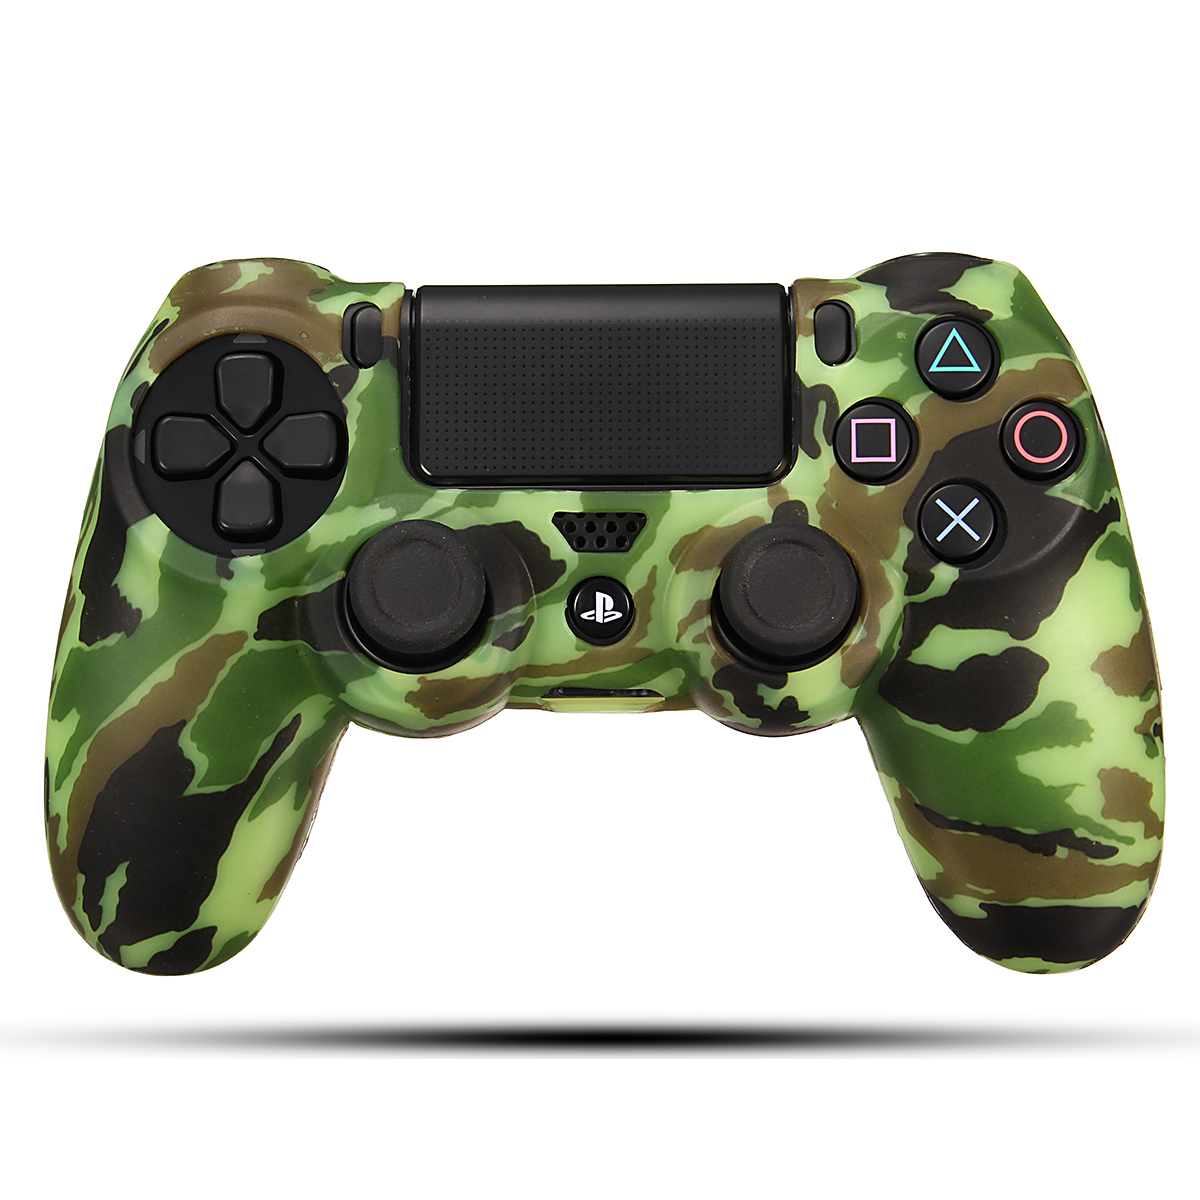 Durable Decal Camouflage Grip Cover Case Silicone Rubber Soft Skin Protector for Playstation 4 for Dualshock 4 Gamepad 48